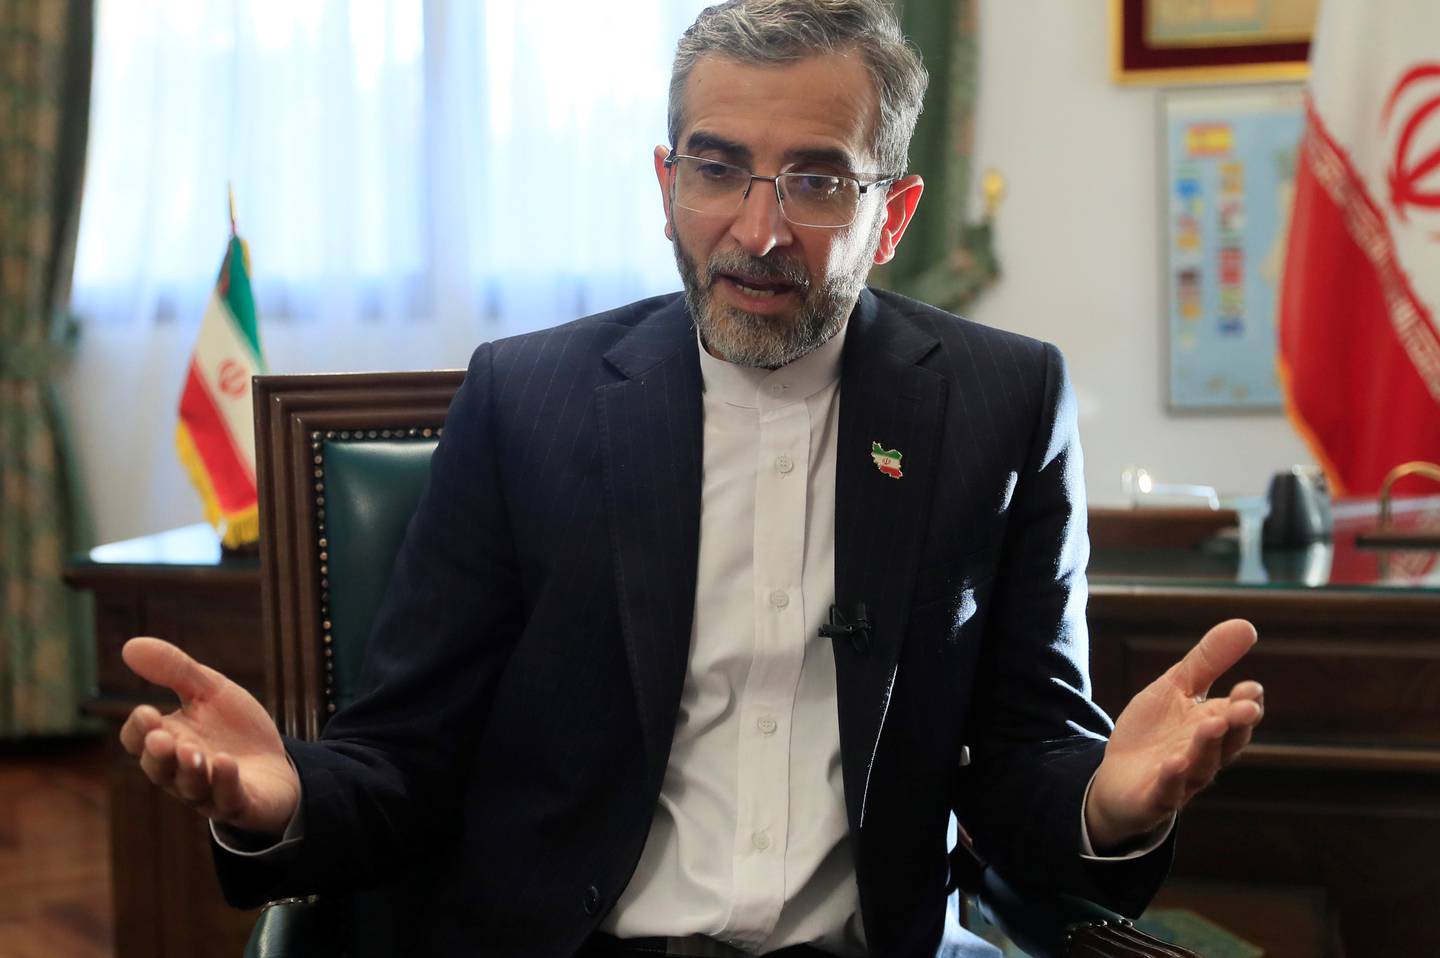 Iran's chief negotiator Ali Bagheri Kani during an interview in Madrid, Spain, this month. EPA